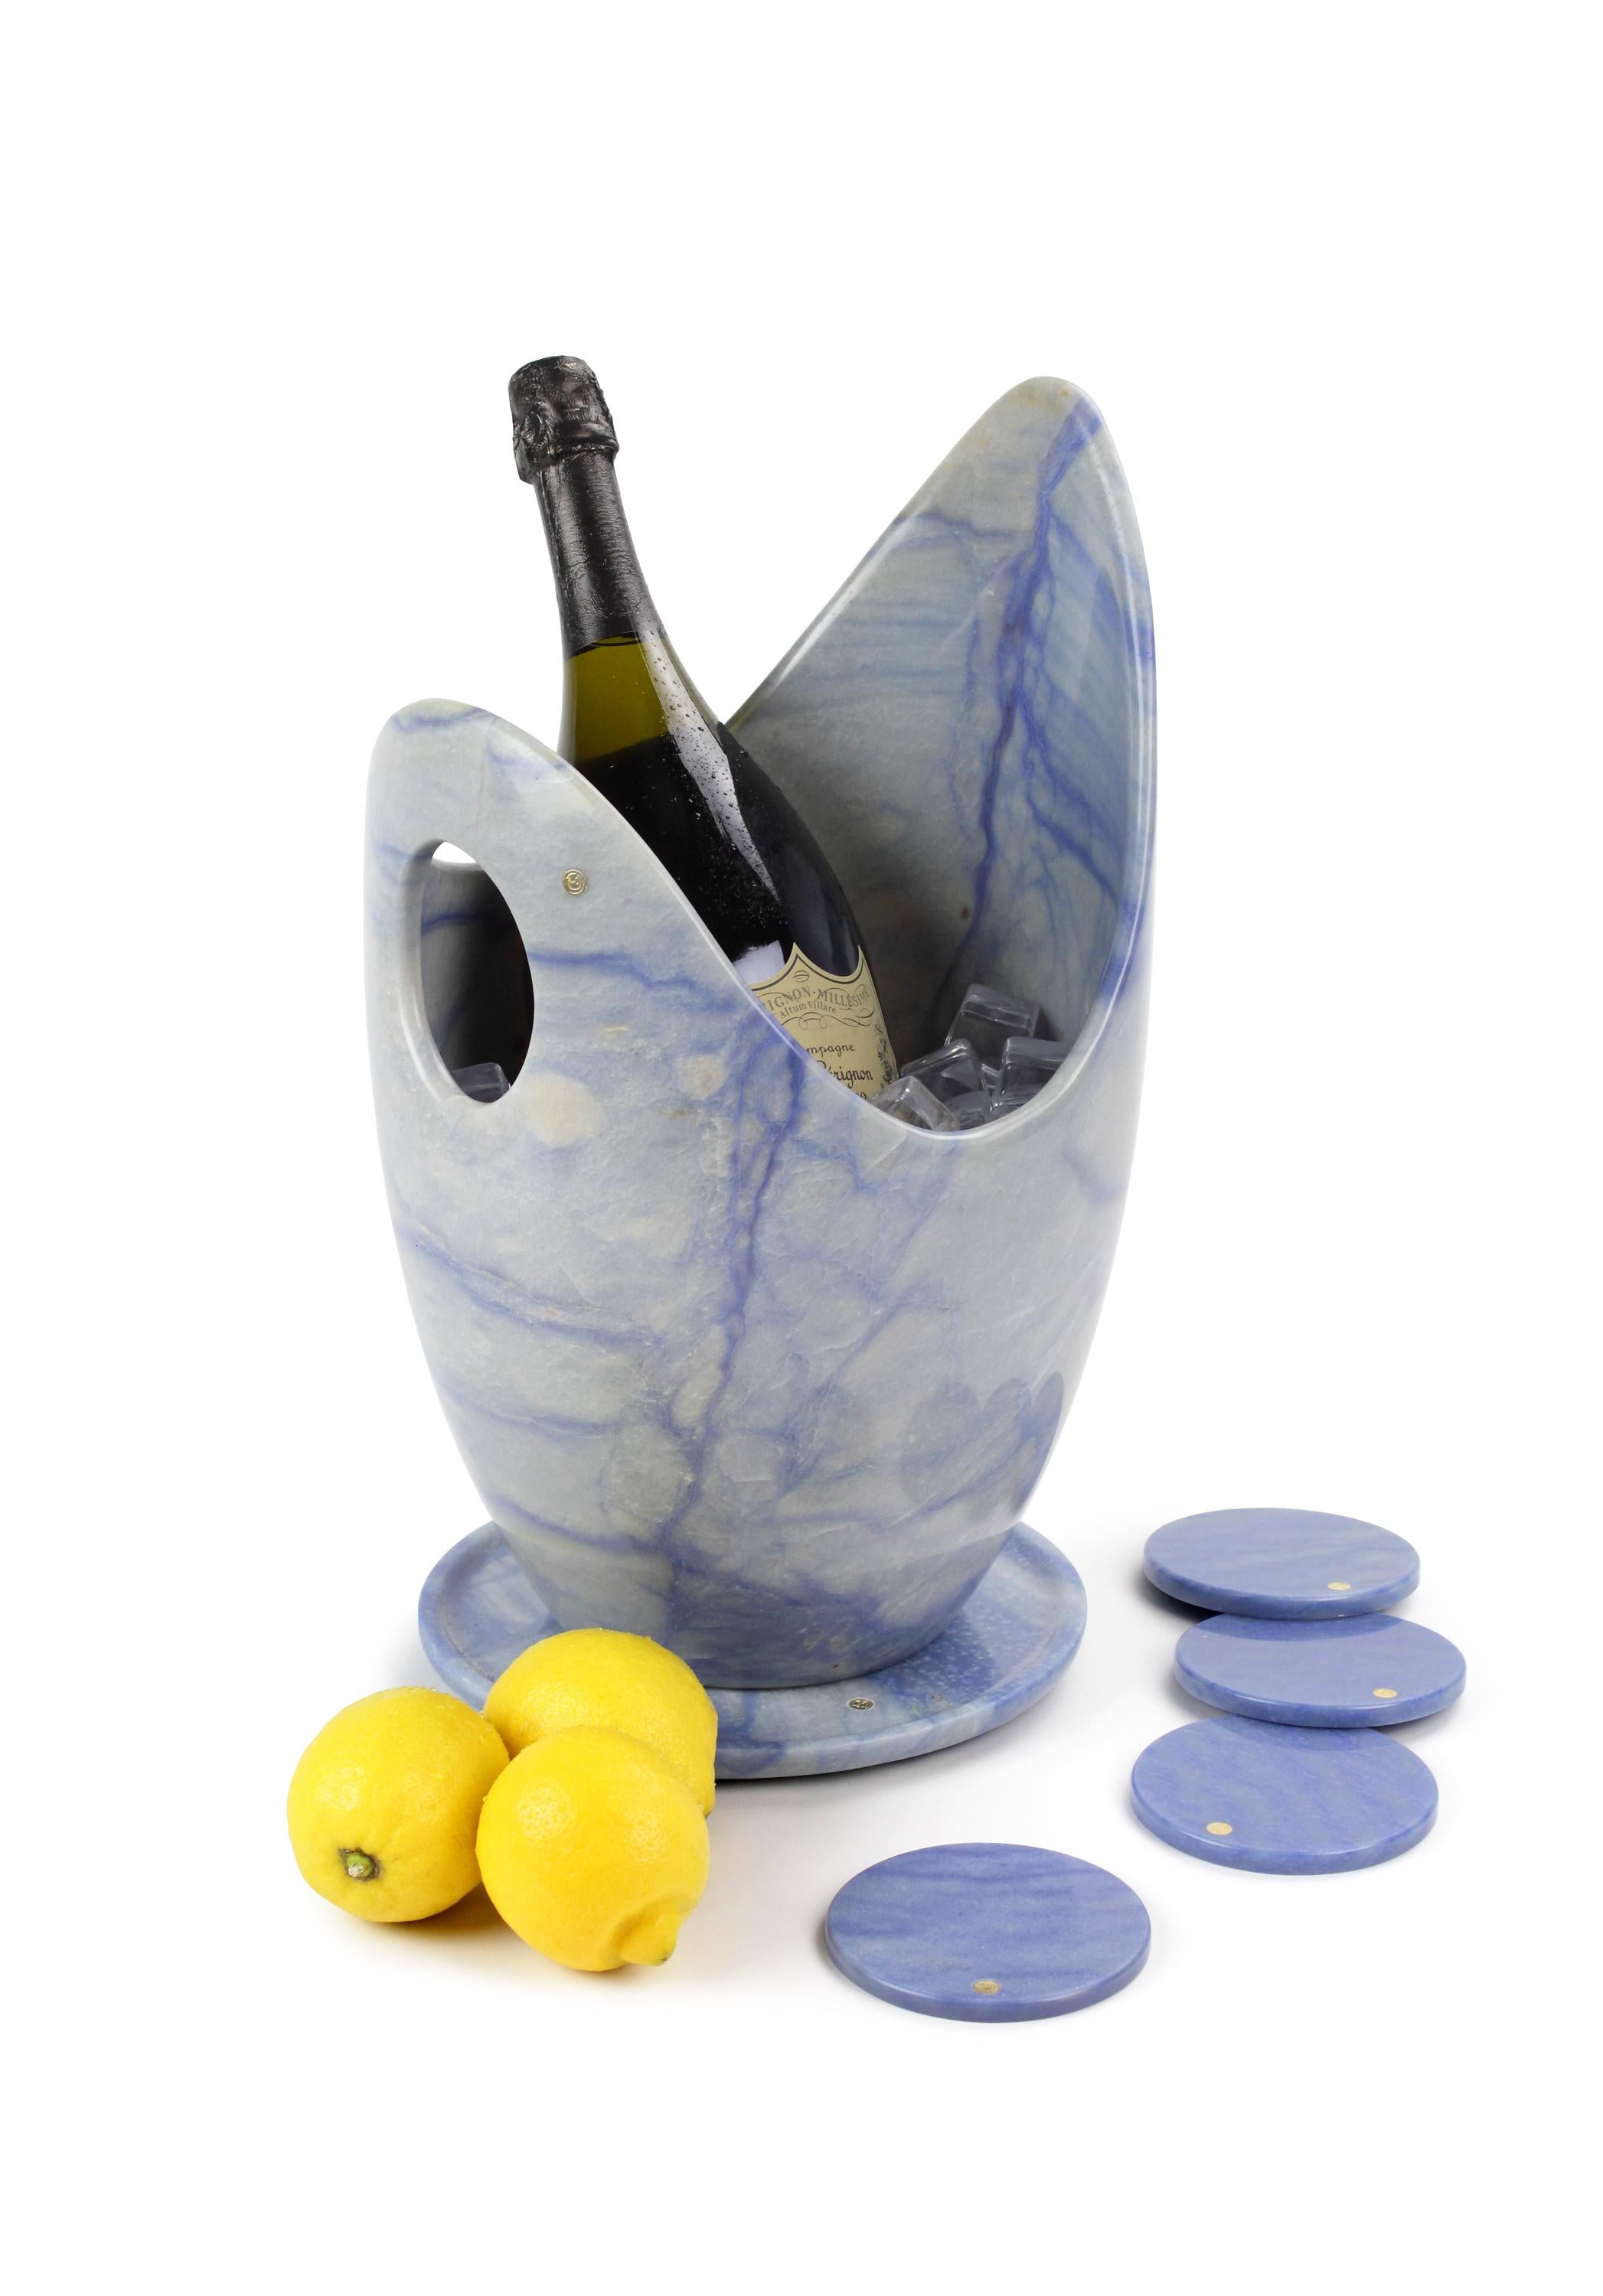 Luxurious and big Champagne bucket set sculpted by hand from a solid block of Azul Macaubas. 
The set consisting of 1 Champagne bucket, 1 circular plate and 4 circular coasters. Polished finishing. 

Champagne bucket dimensions: D26 H 41 cm.